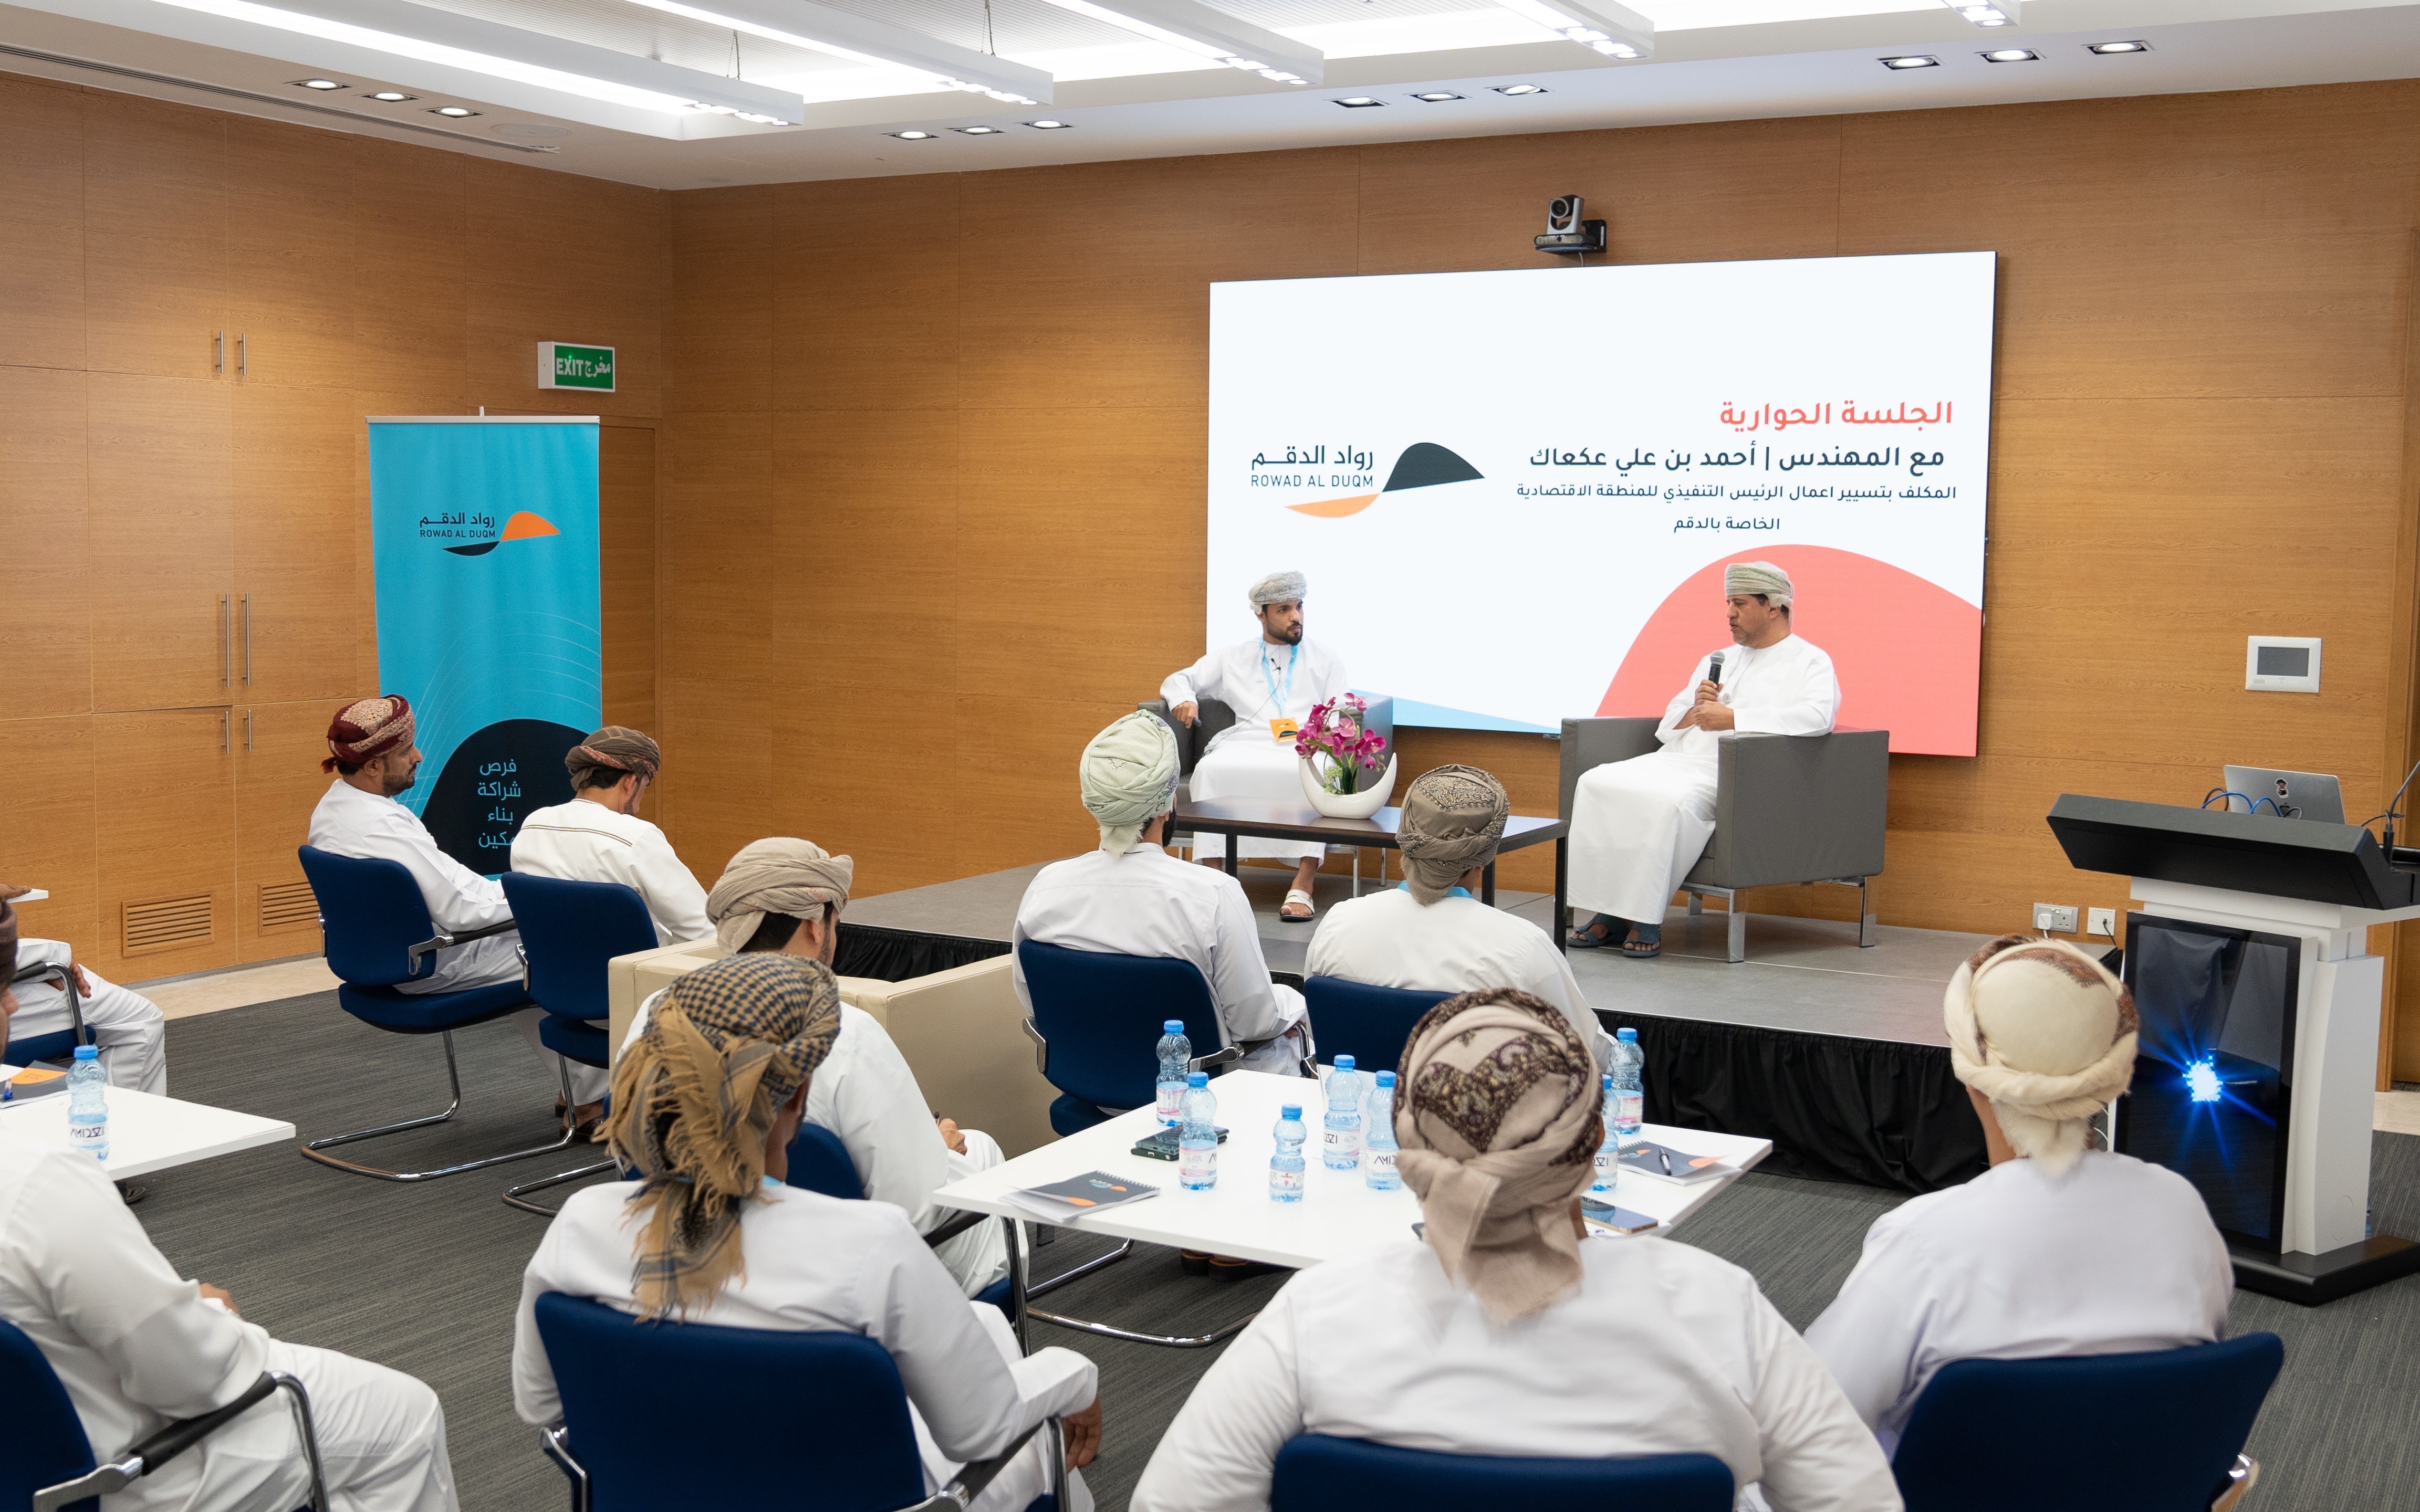 Rowad Duqm" programme concludes in the Special Economic Zone at Duqm